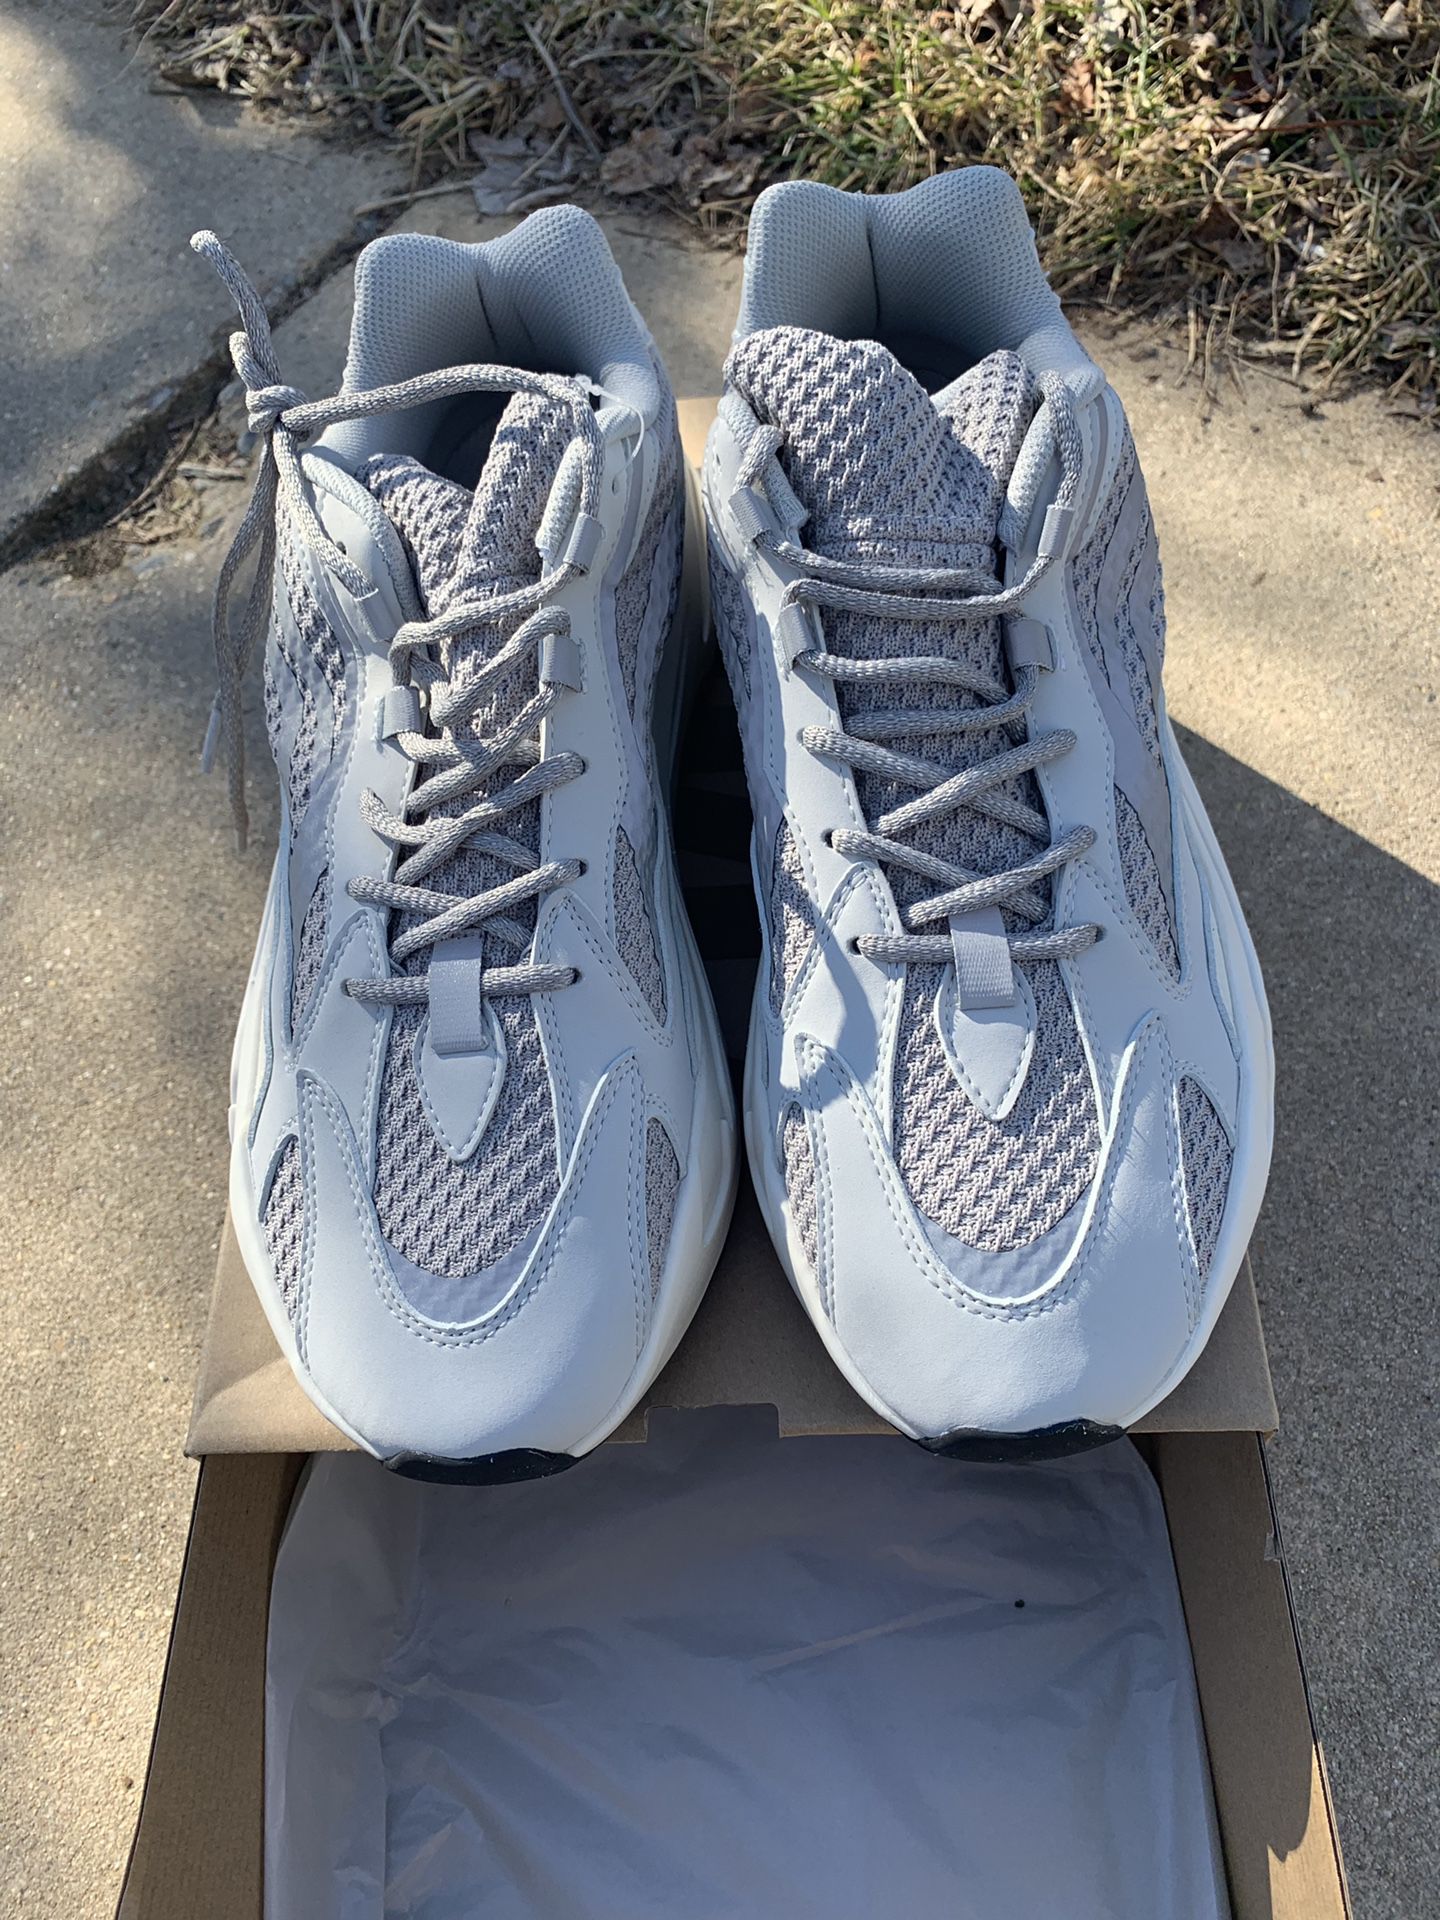 Yeezy boost 700 static size 13